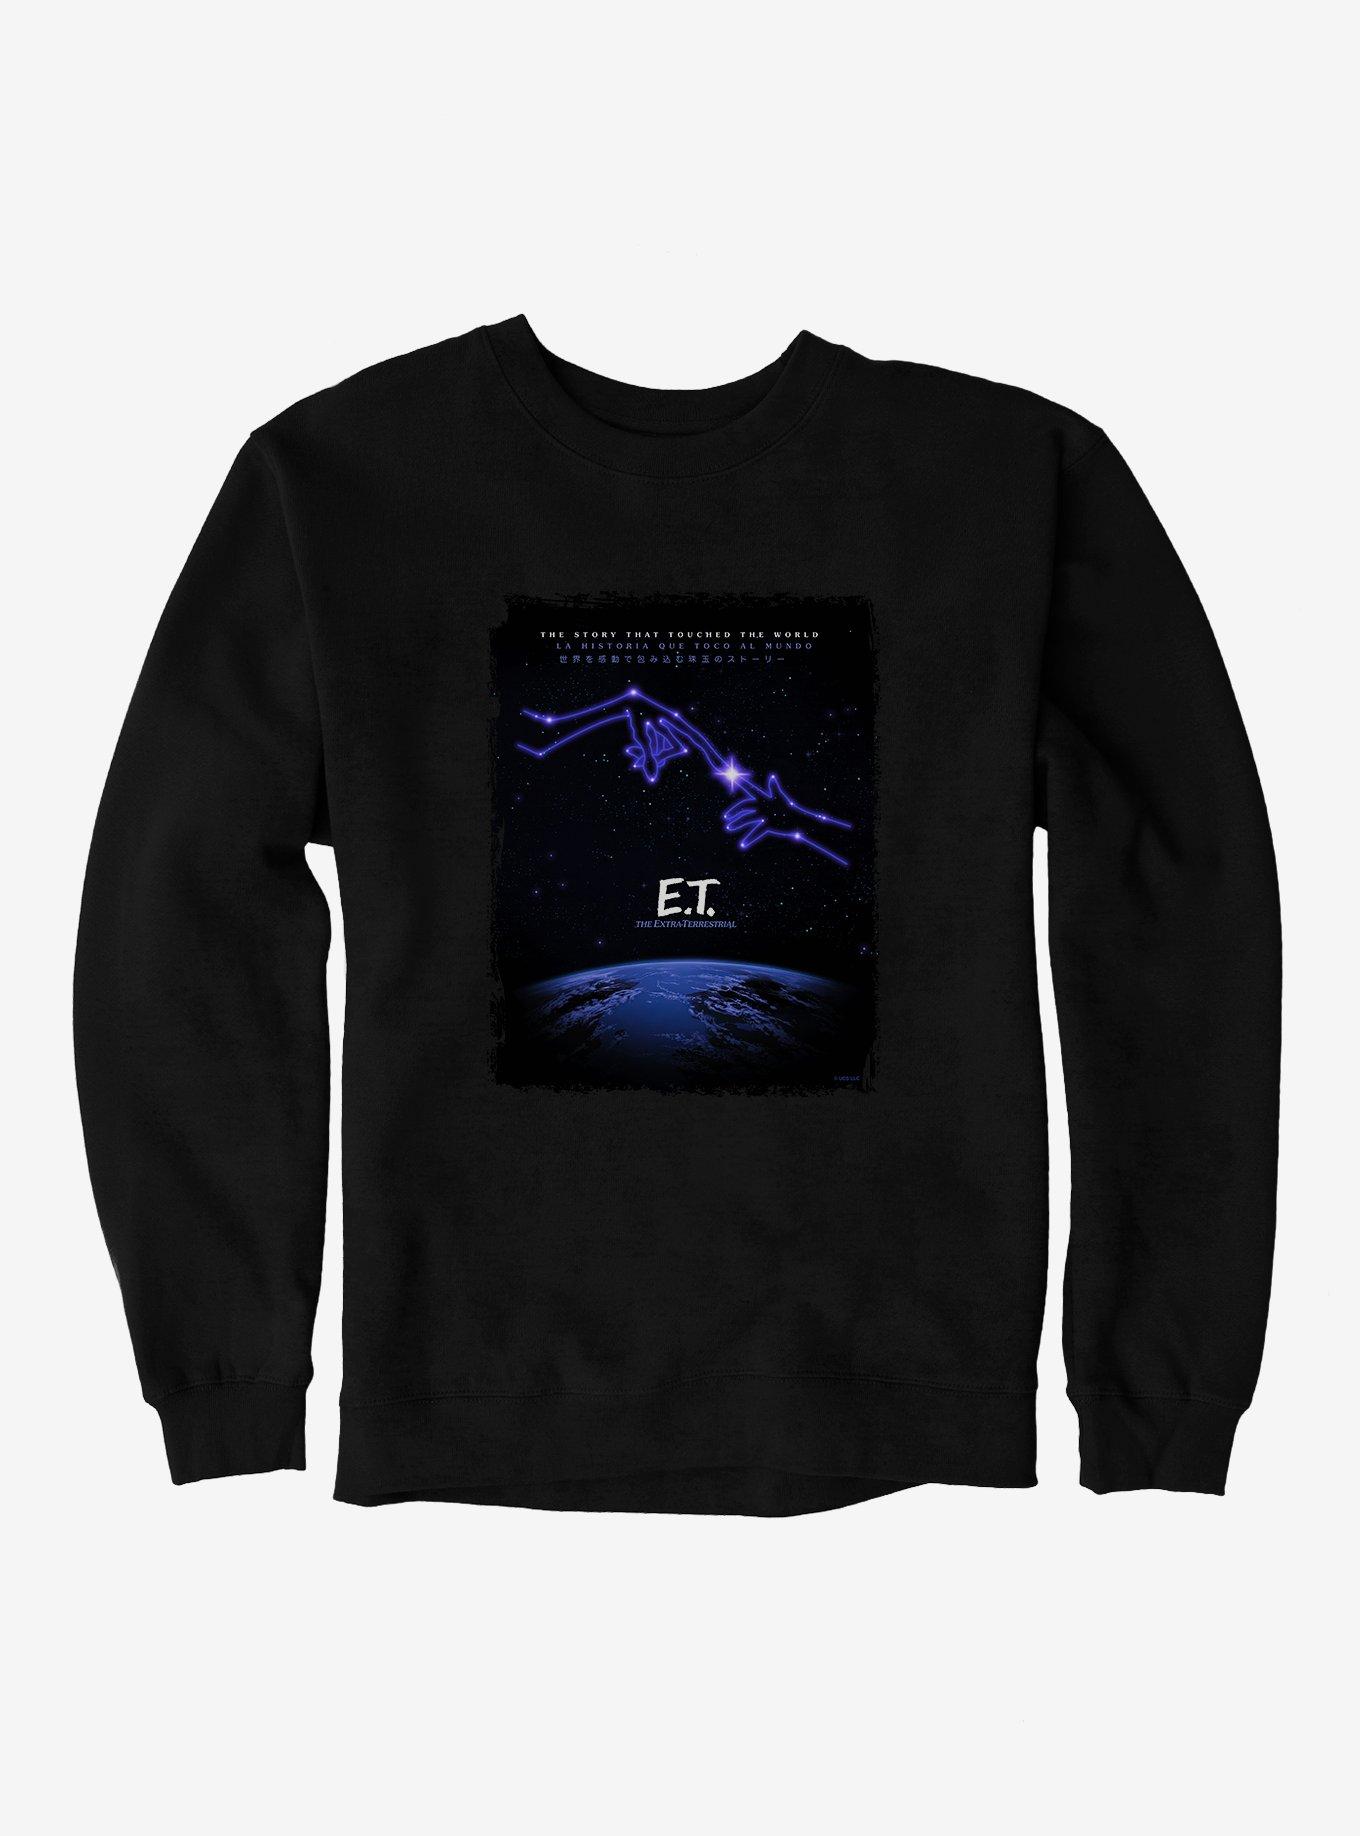 E.T. 40th Anniversary The Story That Touched The World Sweatshirt, , hi-res